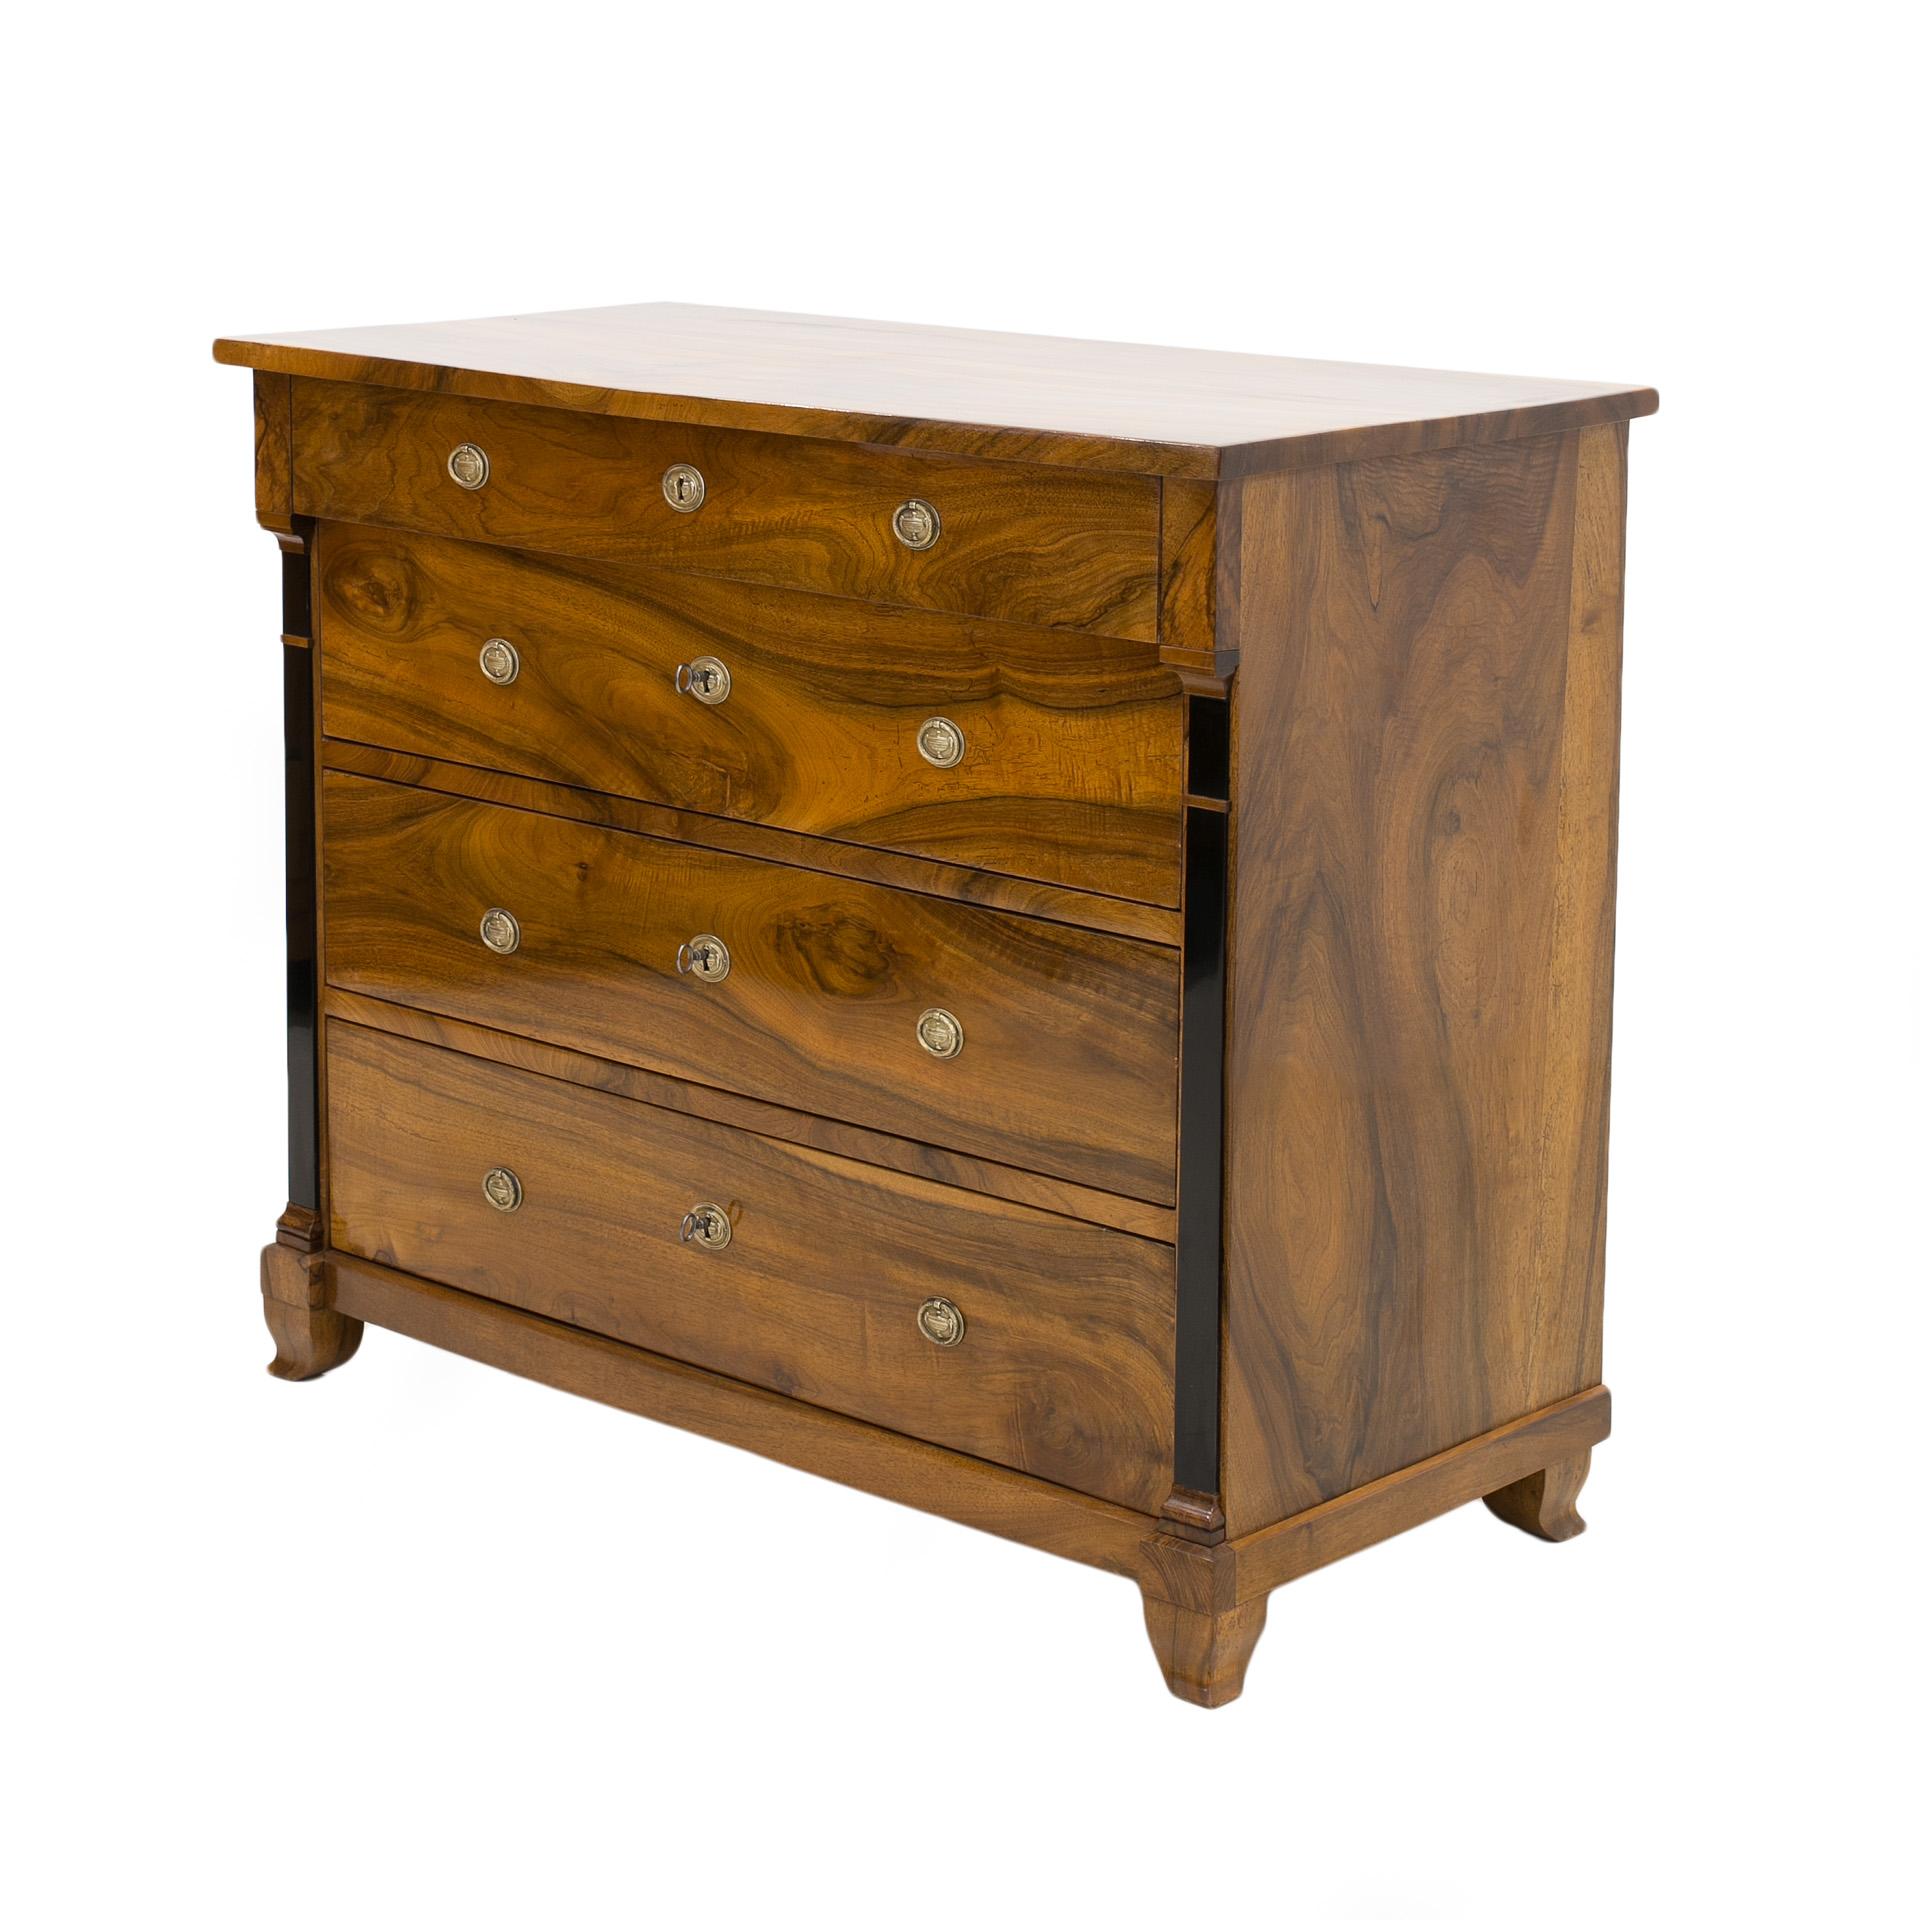 Biedermeier style chest of drawers from the beginning of the 19th century. This piece of furniture comes from France. It was made of solid walnut wood. Finished with shellac polish, applied manually with a high gloss tampon with blurred pores, which